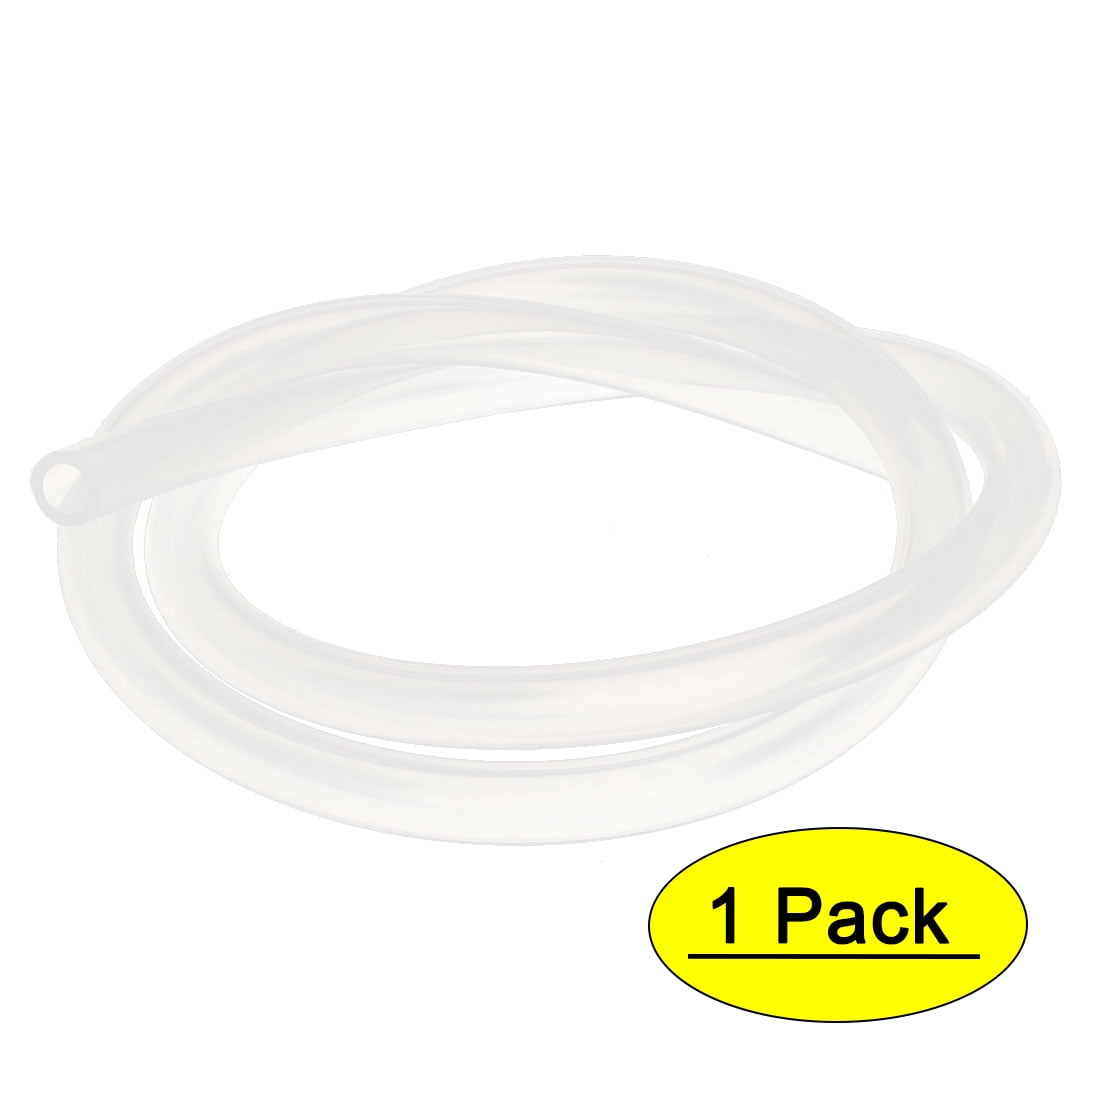 6mm Food Grade Tubing for Drinking Water,6mm OD x 4mm ID,Fridges 100 Metres 